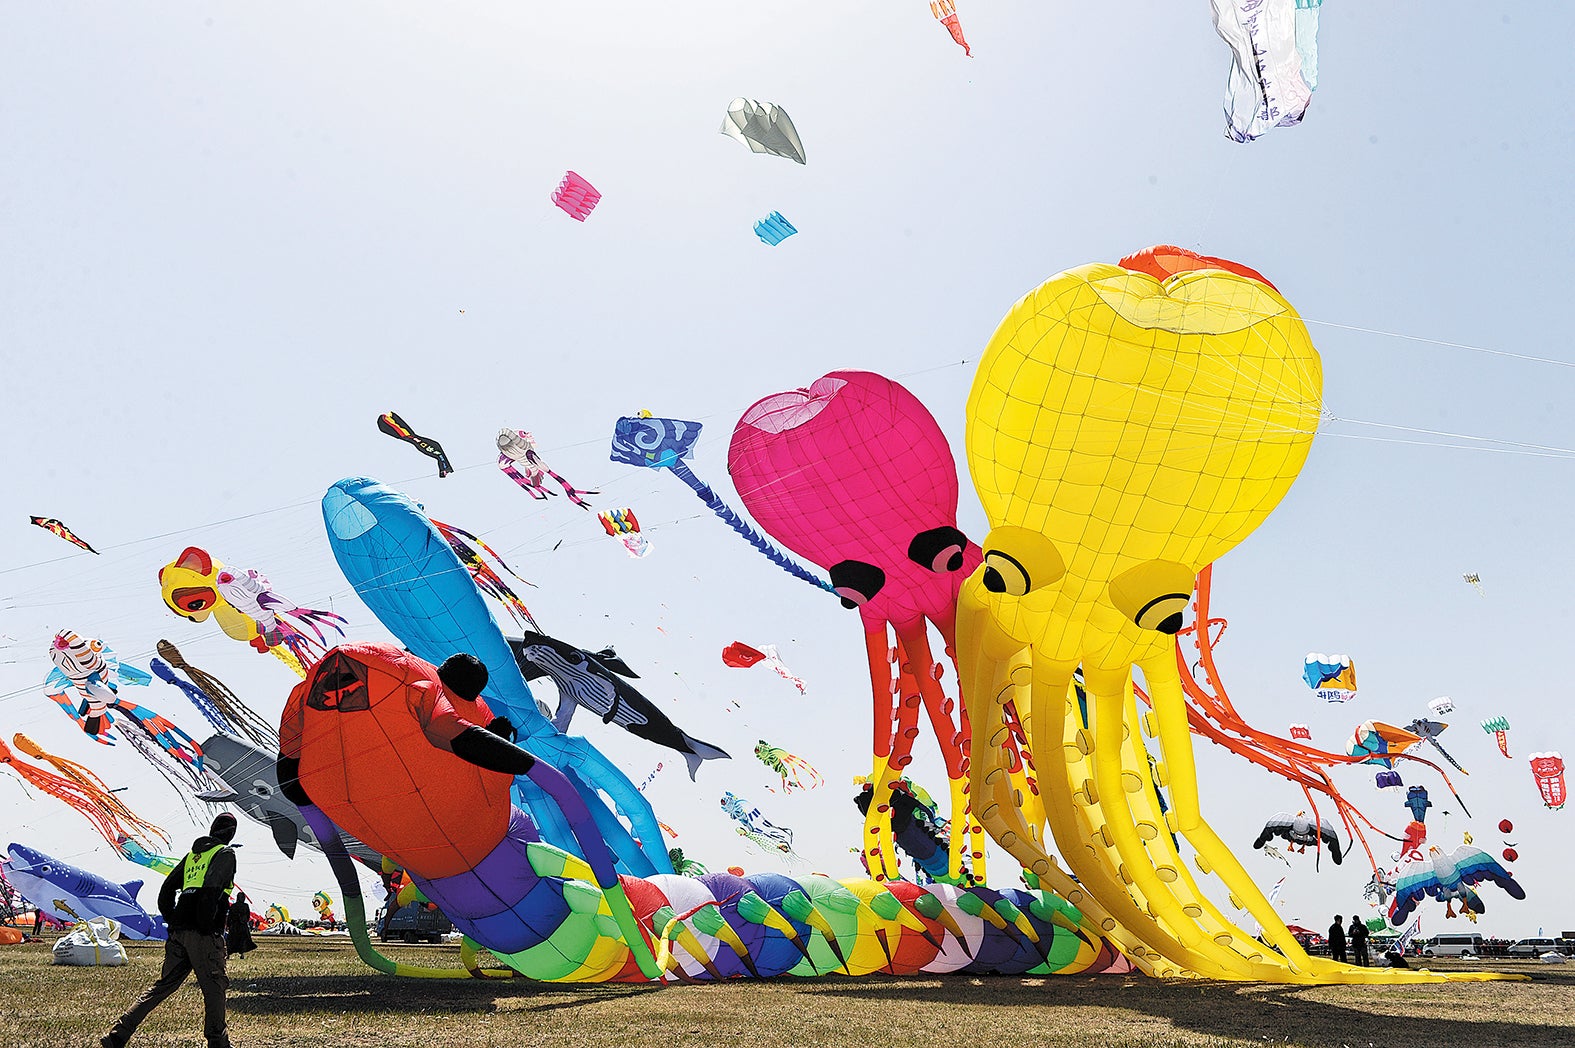 Kites in all shapes and sizes dot the sky on April 16, 2023, during the 40th Weifang International Kite Festival in Weifang, Shandong province